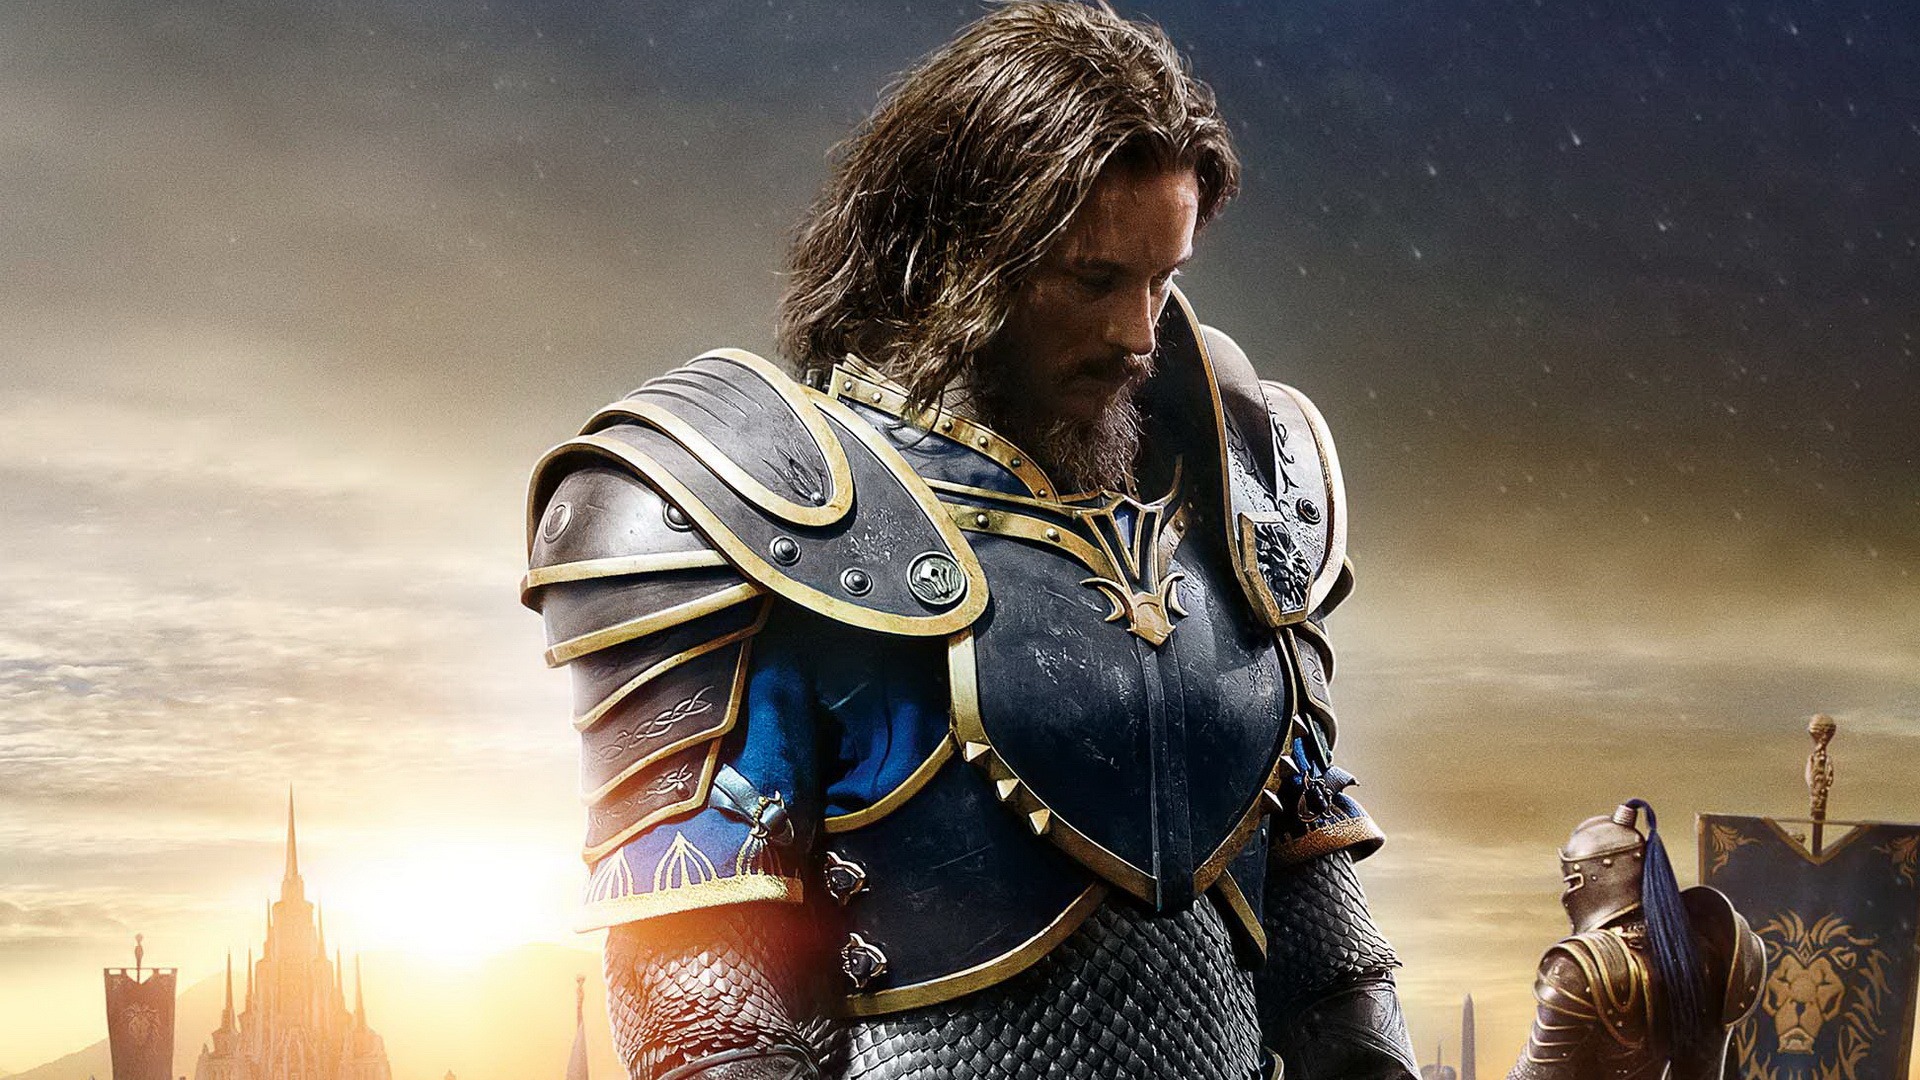 Warcraft, 2016 movie HD wallpapers #28 - 1920x1080